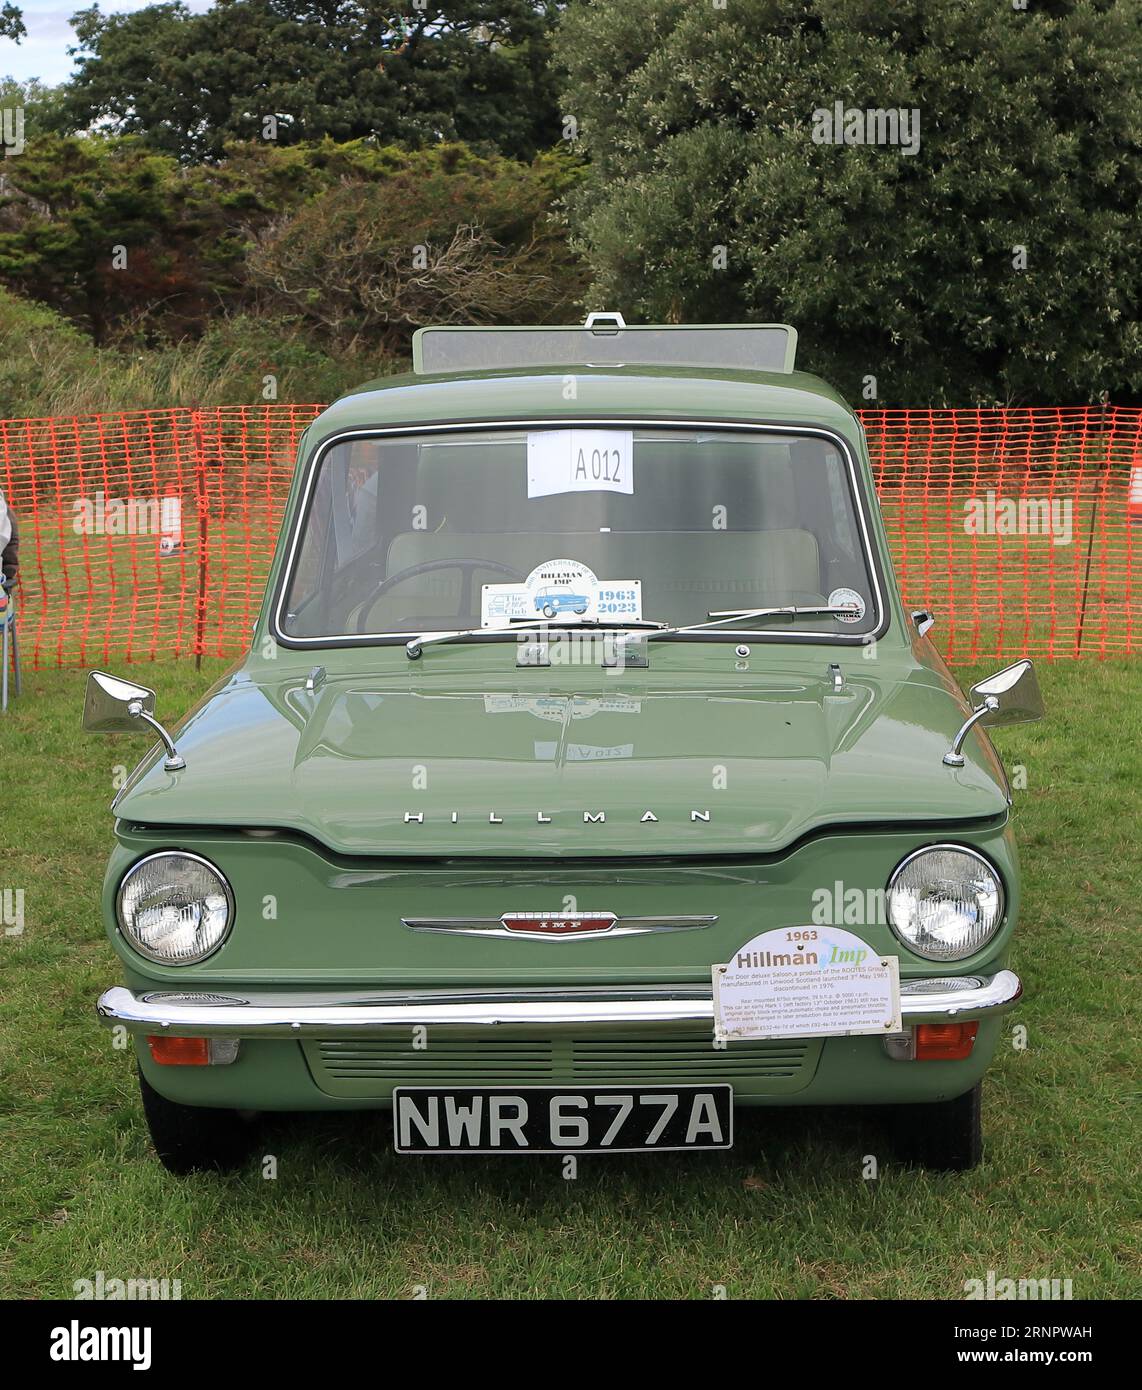 1963 green Hillman Imp motor car on display. The Gosport Car Rally is organised by the local Rotary Club and takes place at Stokes Bay on the August bank holiday Monday. This year's event, providing a cheap family day out, was the seventieth and hosted vintage cars and motorbikes, a petting farm, stalls, refreshments and an arena which provided various forms of entertainment. Stock Photo